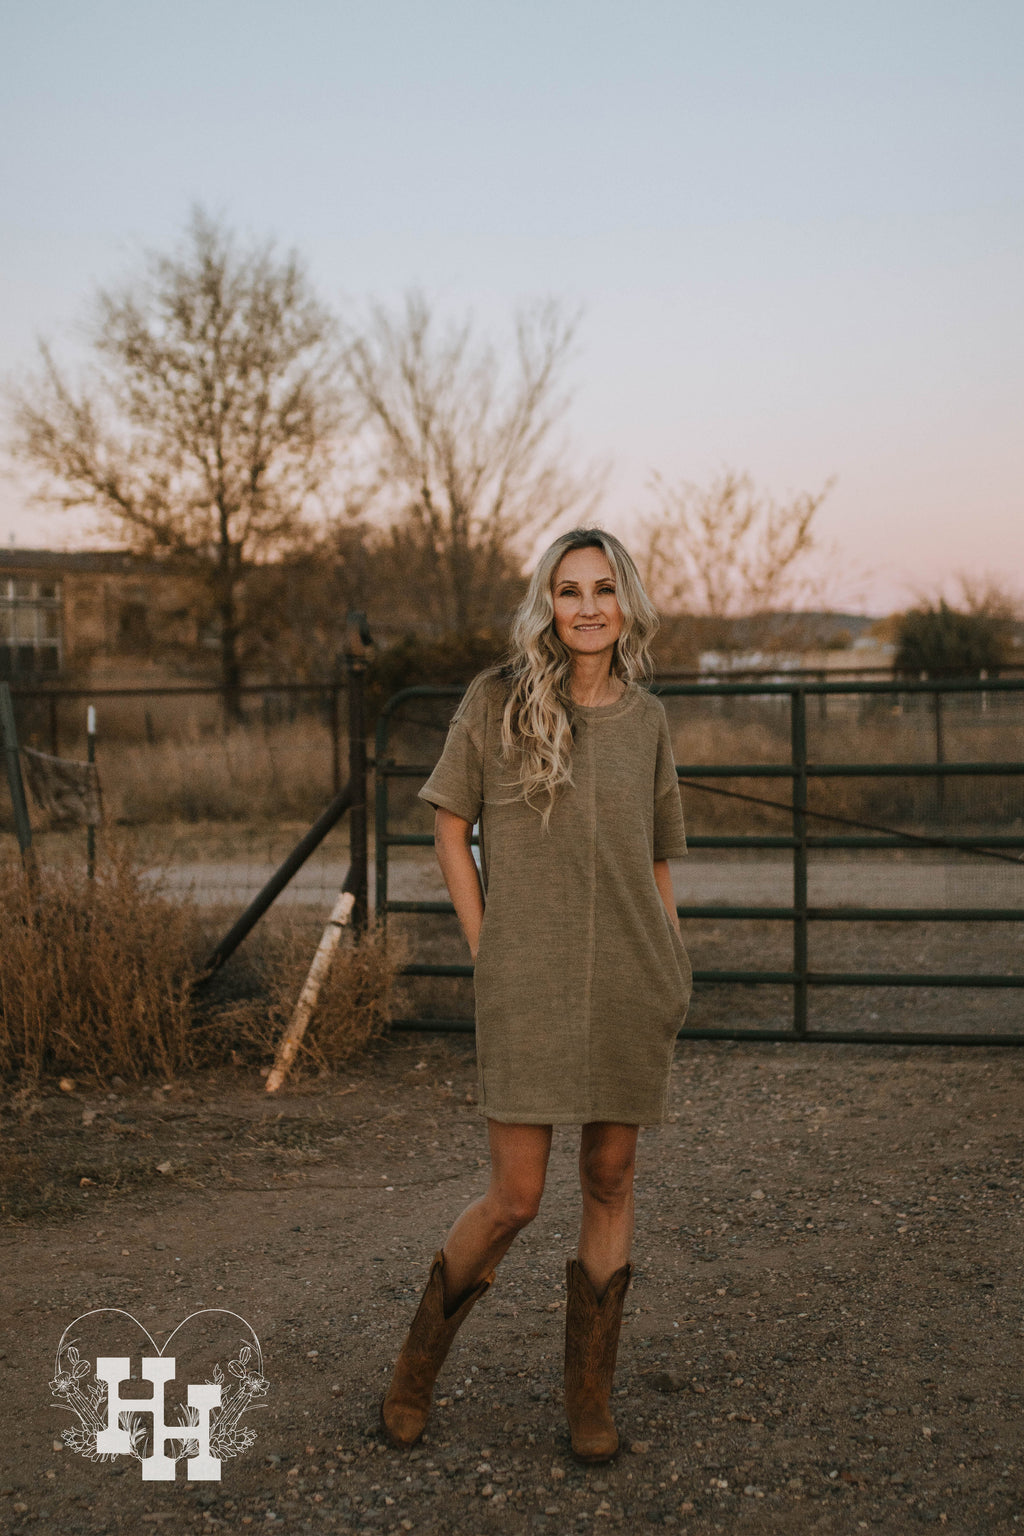 Girl standing in front of gate wearing a knit light olive green tshirt dress with her hands in the pocket with cowboy boots.